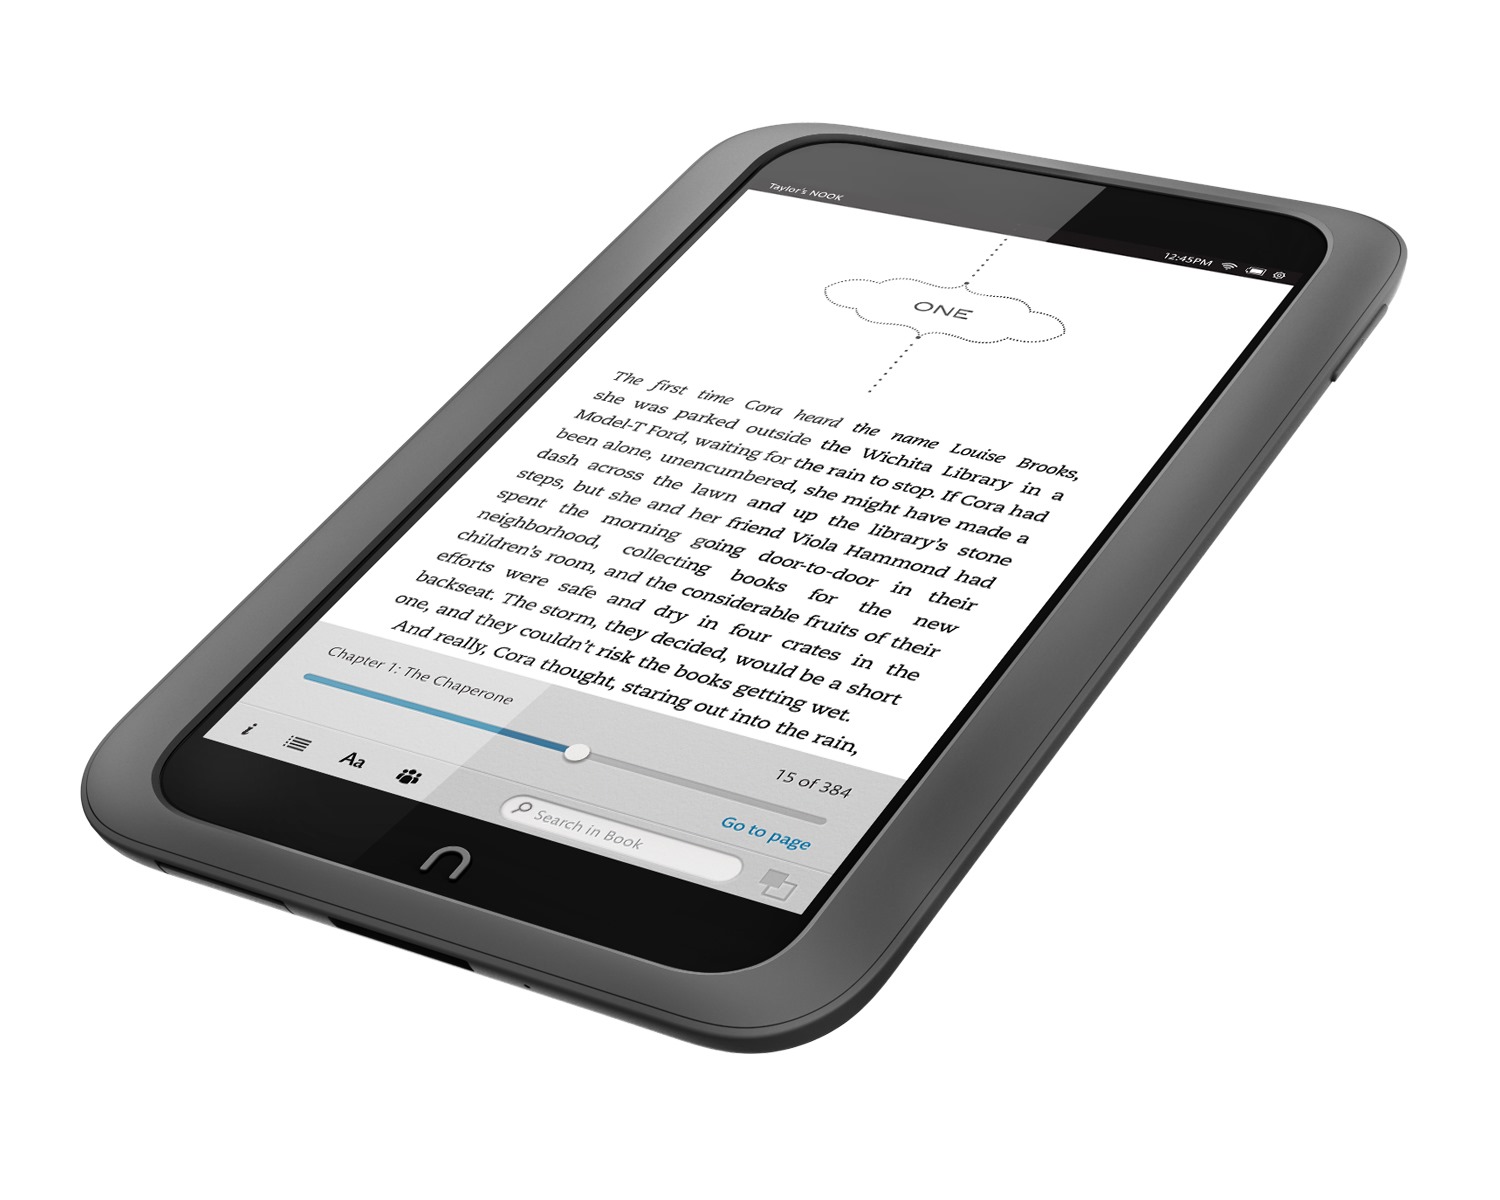 Barnes & Noble Nook HD Full Specifications And Price Details - Gadgetian